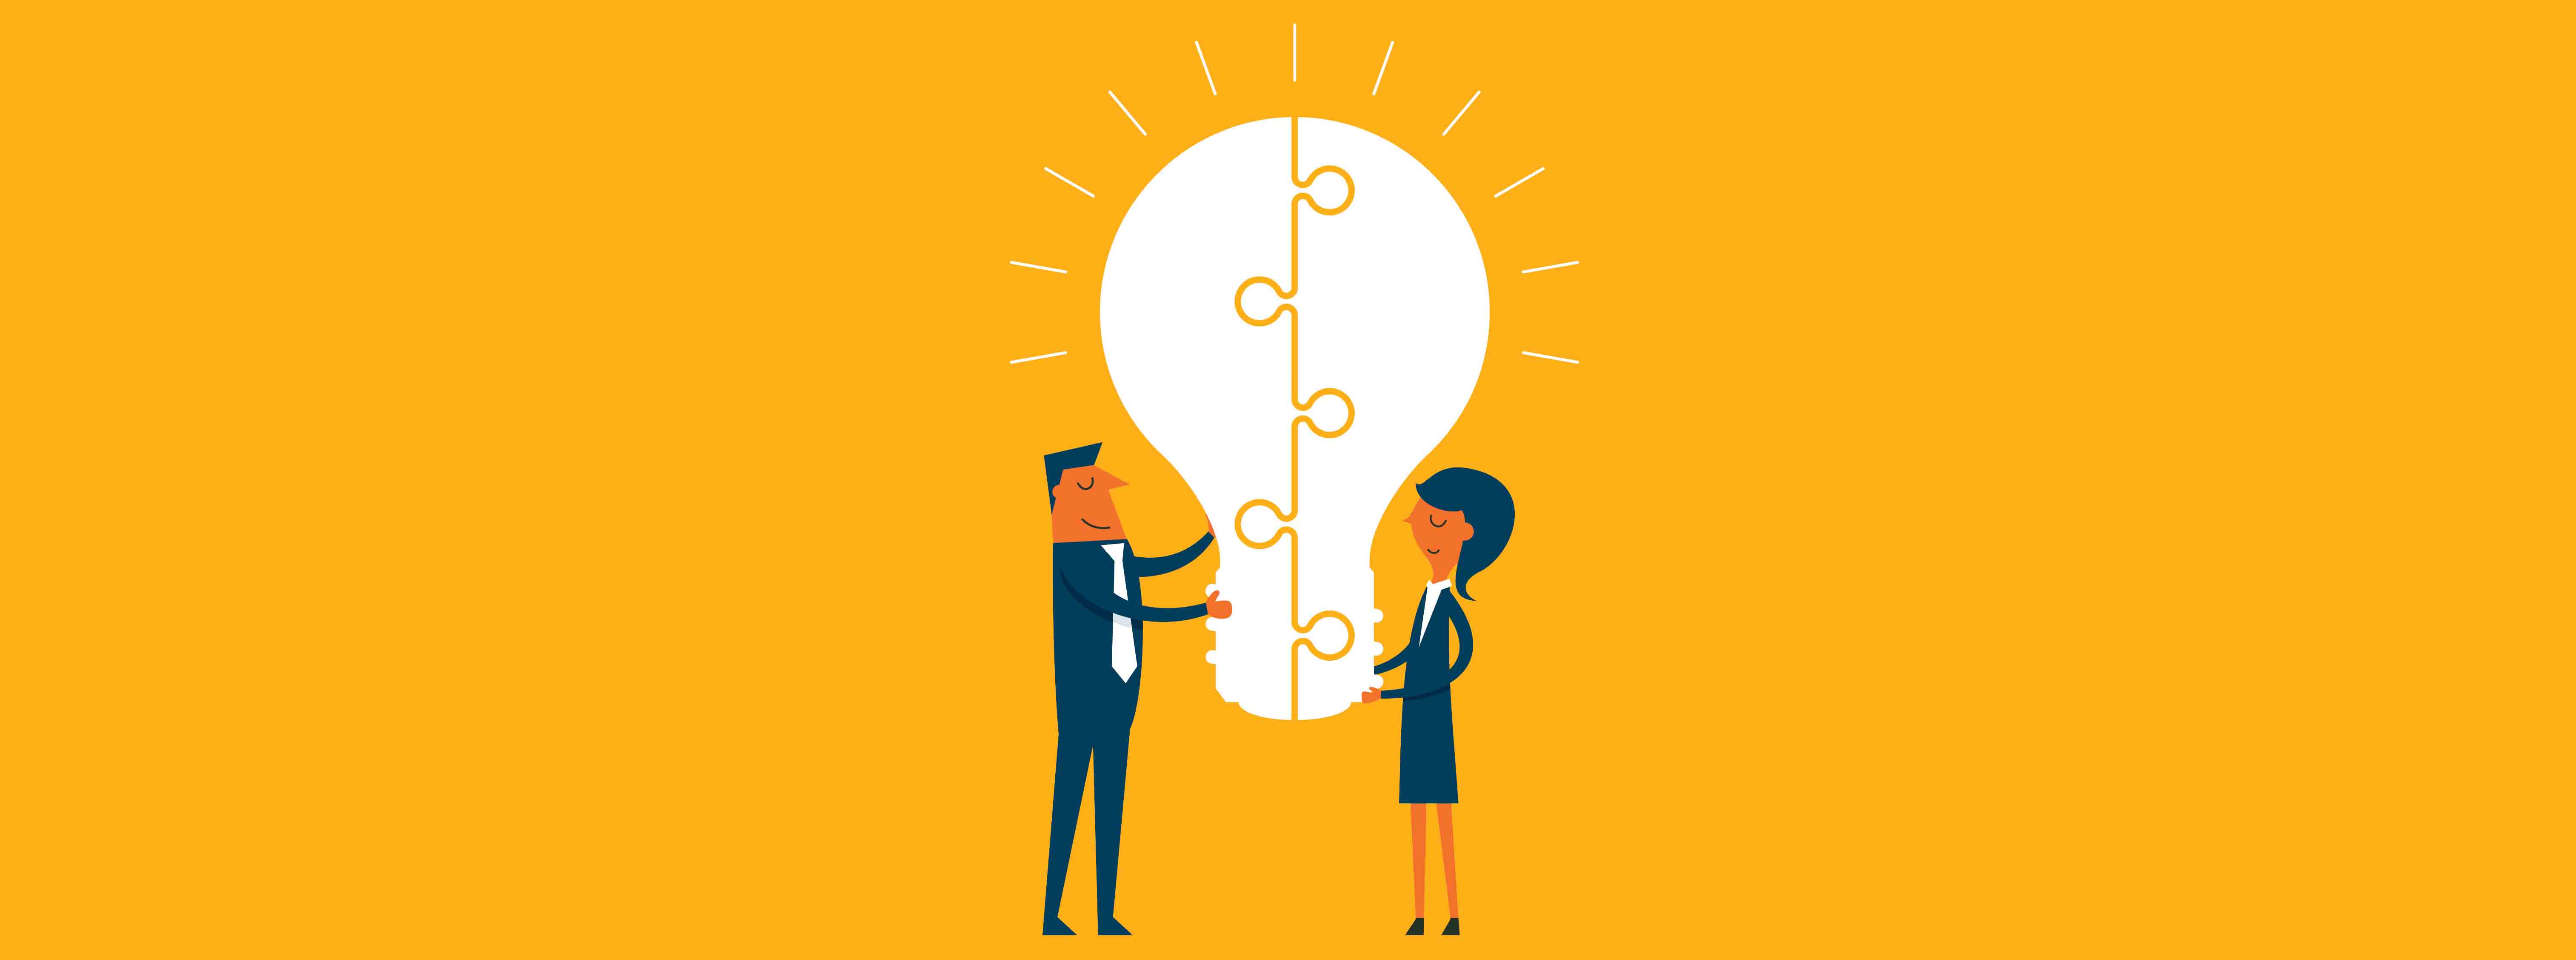 illustration of two people putting a light bulb together like a puzzle